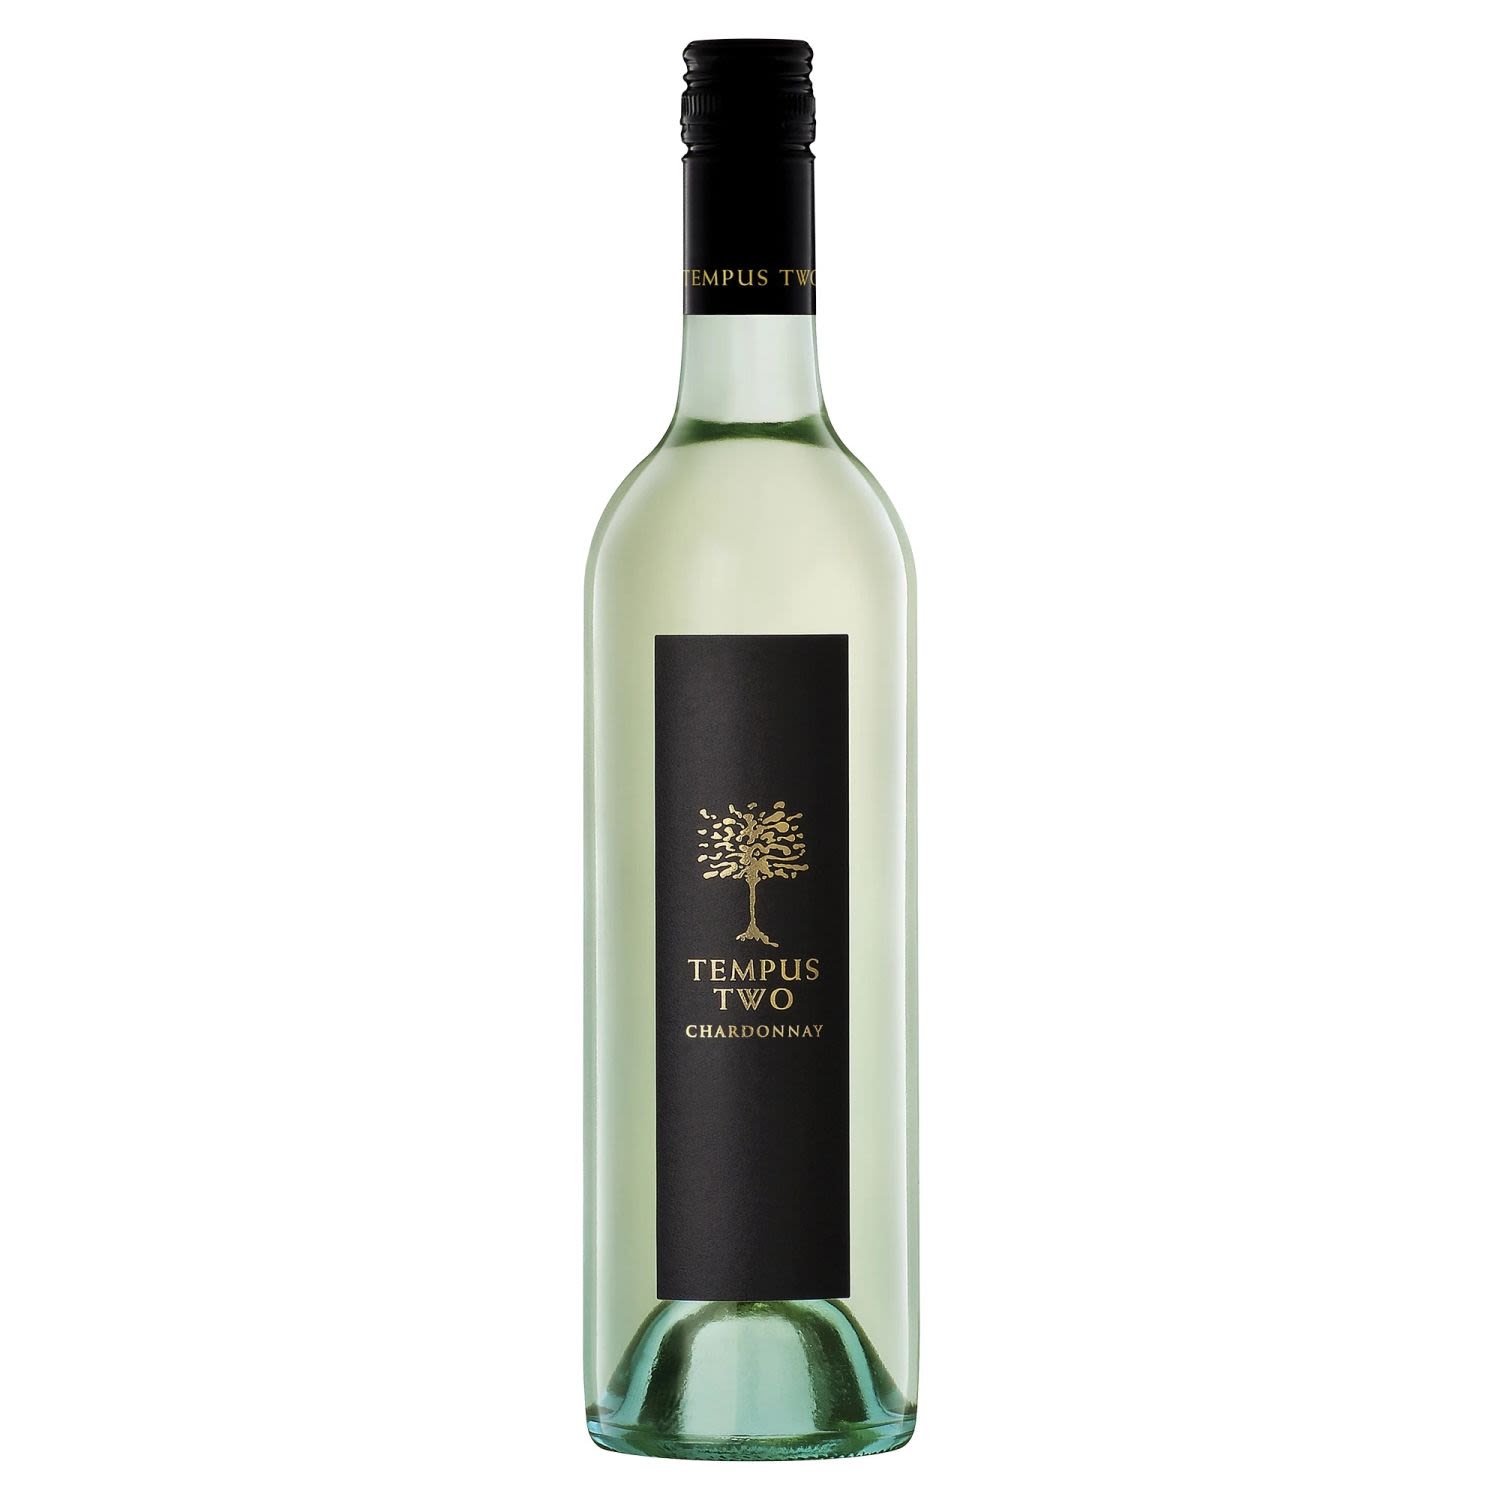 A fresh and zesty wine with citrus and white peach fruit flavours at the fore.<br /> <br />Alcohol Volume: 13.00%<br /><br />Pack Format: Bottle<br /><br />Standard Drinks: 7.7</br /><br />Pack Type: Bottle<br /><br />Country of Origin: Australia<br /><br />Region: South Australia<br /><br />Vintage: Non Vintage<br />